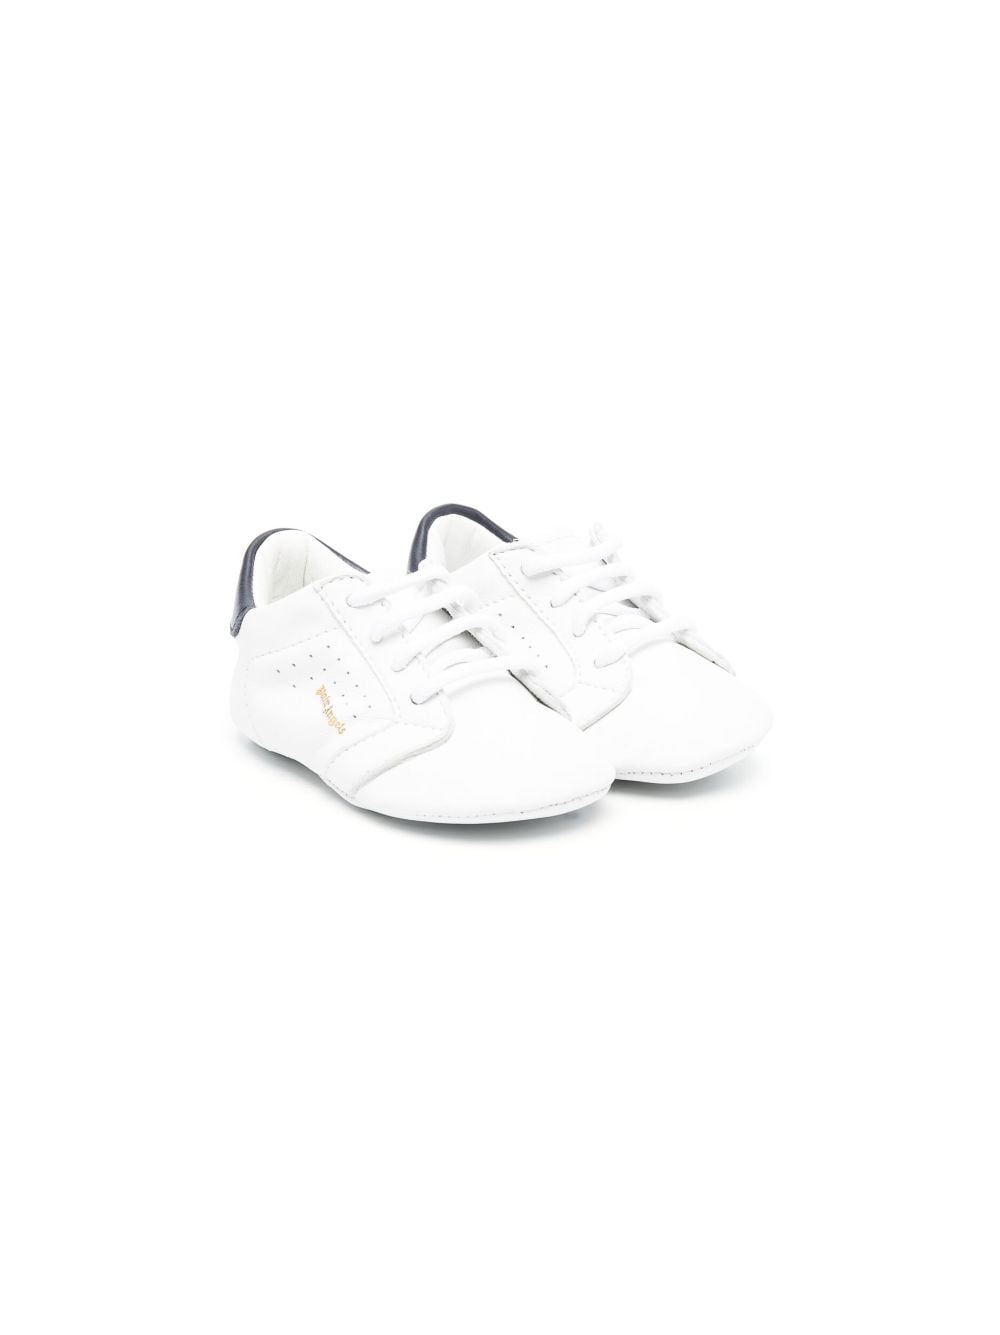 Palm Angels Kids Palm One leather sneakers - White von Palm Angels Kids